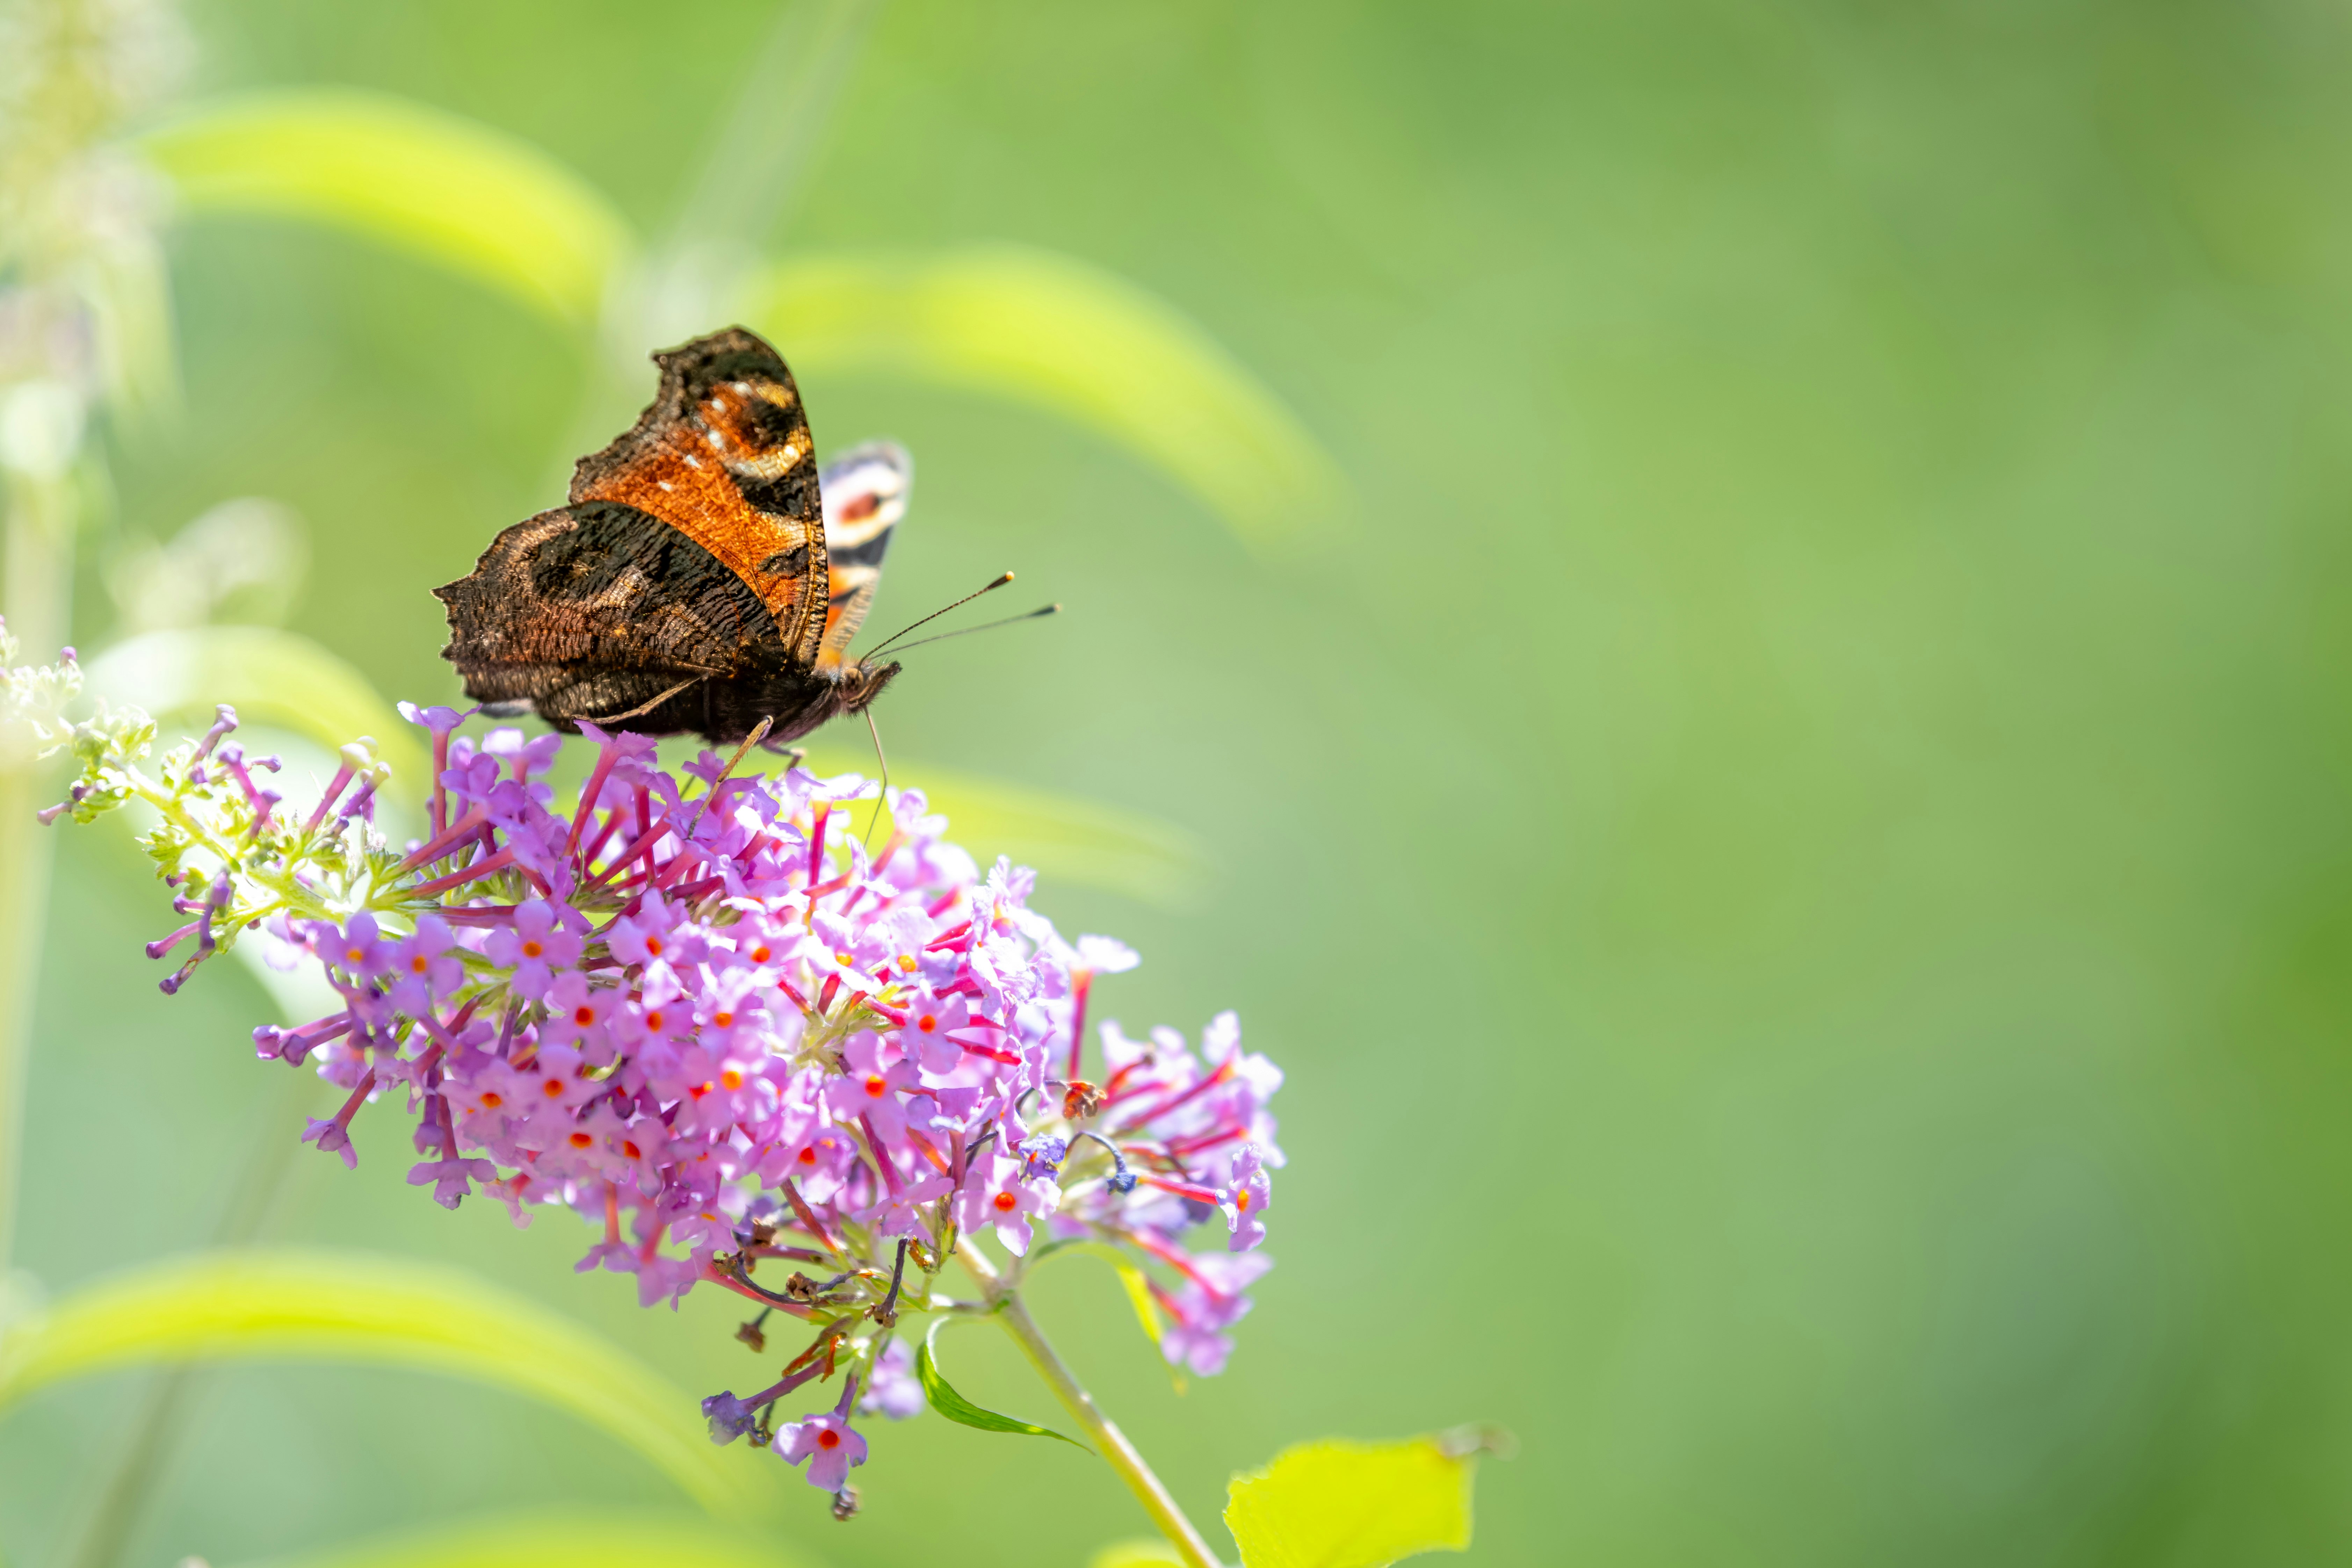 brown and black butterfly perched on purple flower in close up photography during daytime